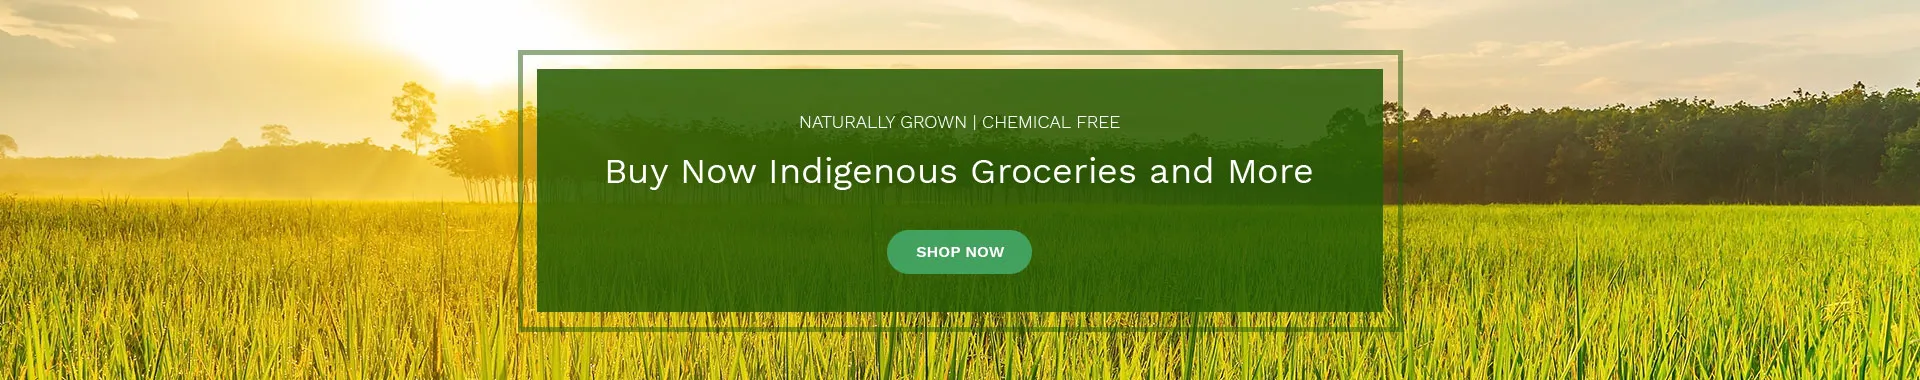 Naturally Grown and Chemical Free- Buy Now Indigenous Groceries and more